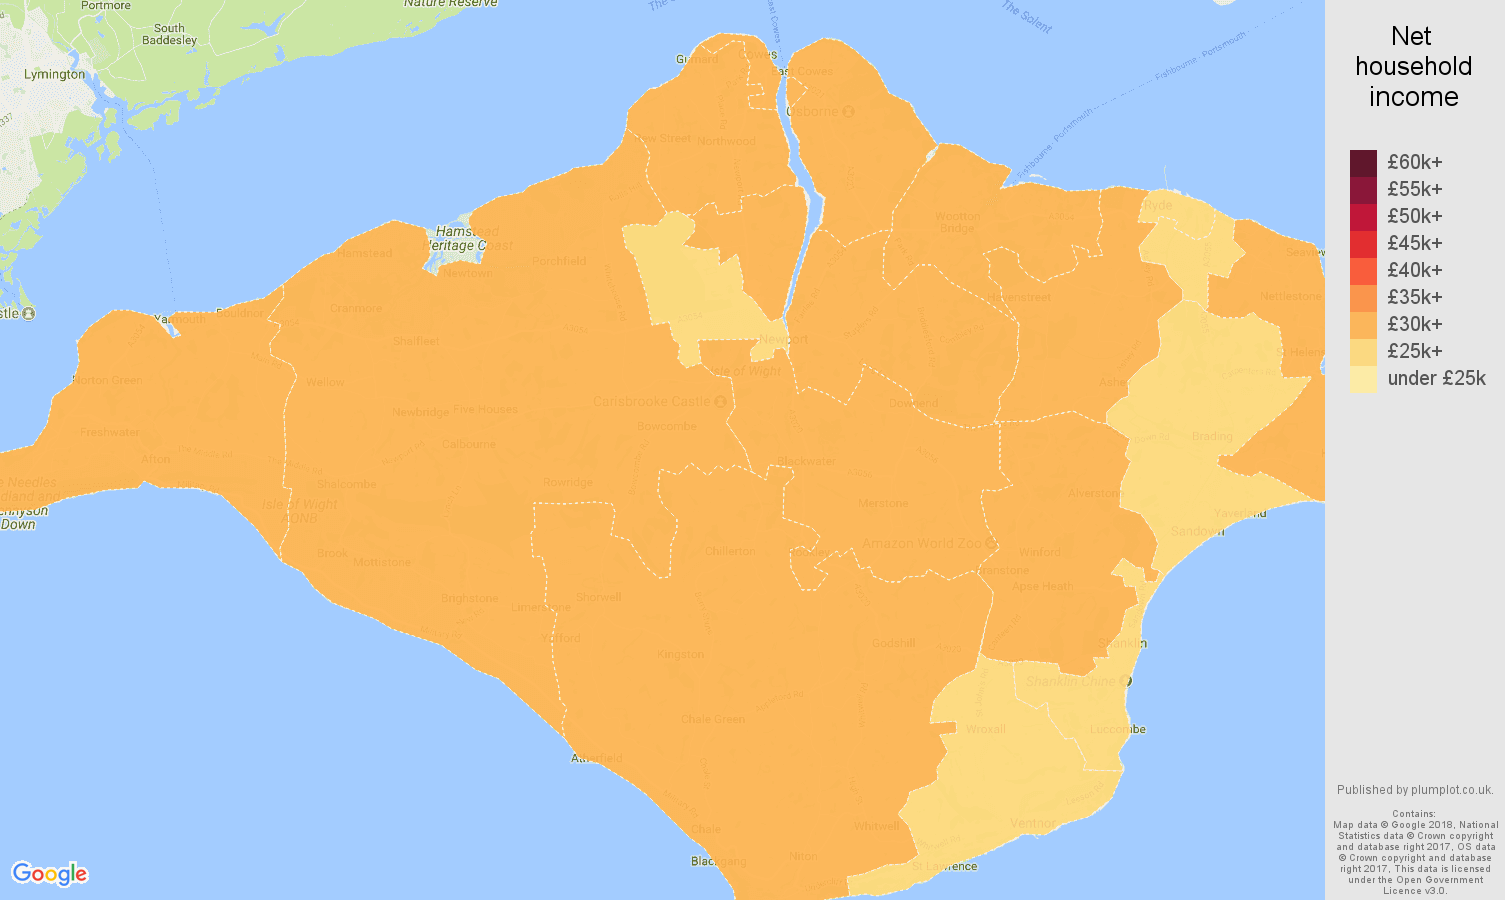 Isle of Wight net household income map